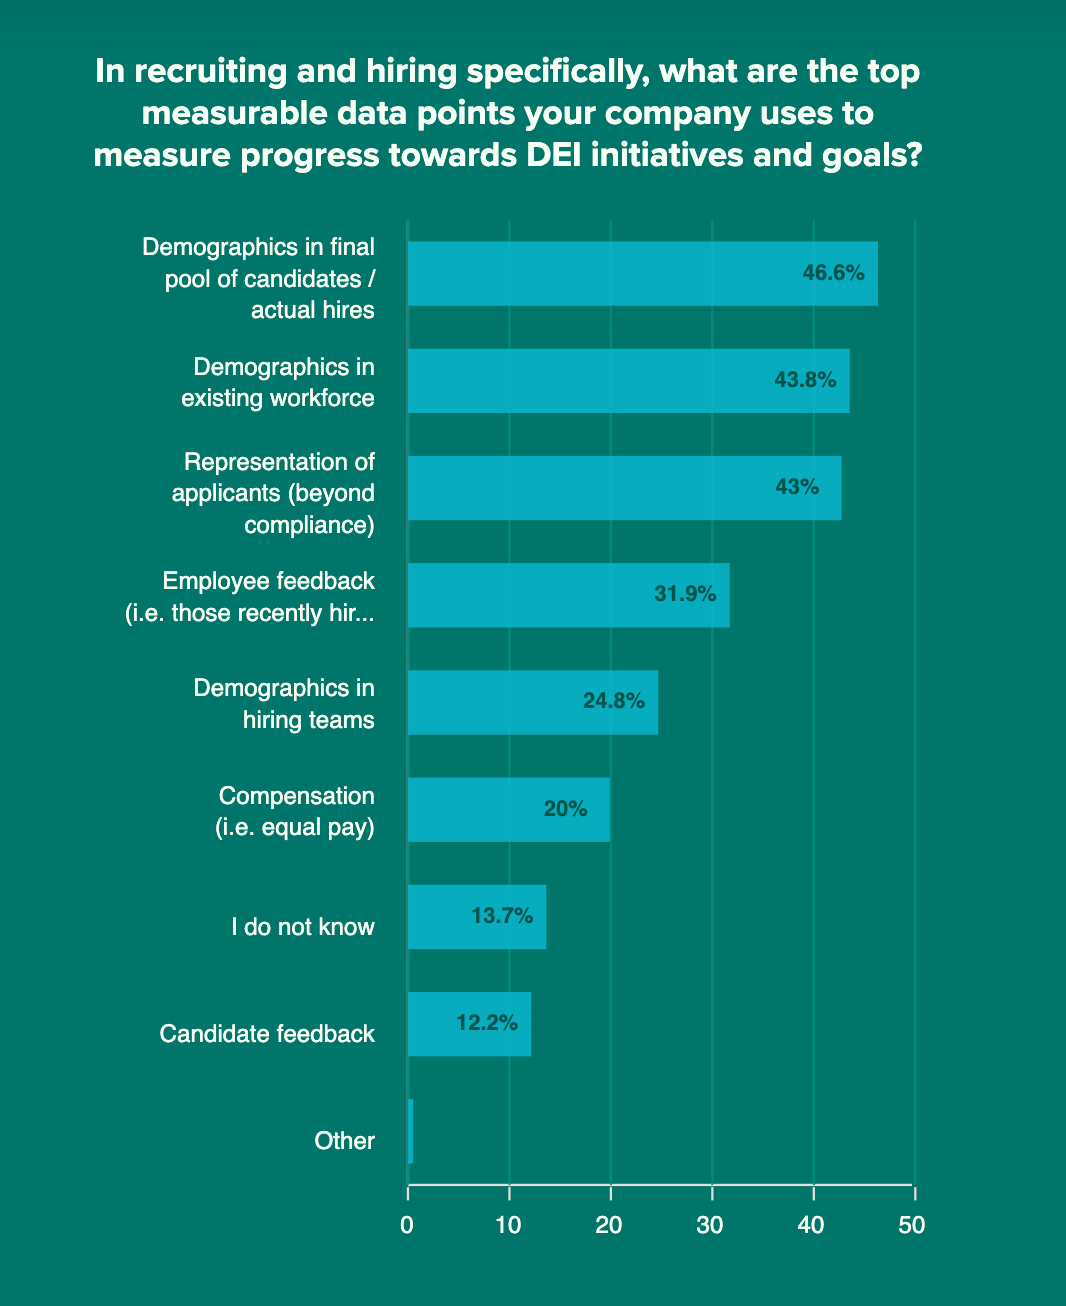 In recruiting and hiring specifically, what are the top measurable data points your company uses to measure progress towards DEI initiatives and goals_(1)